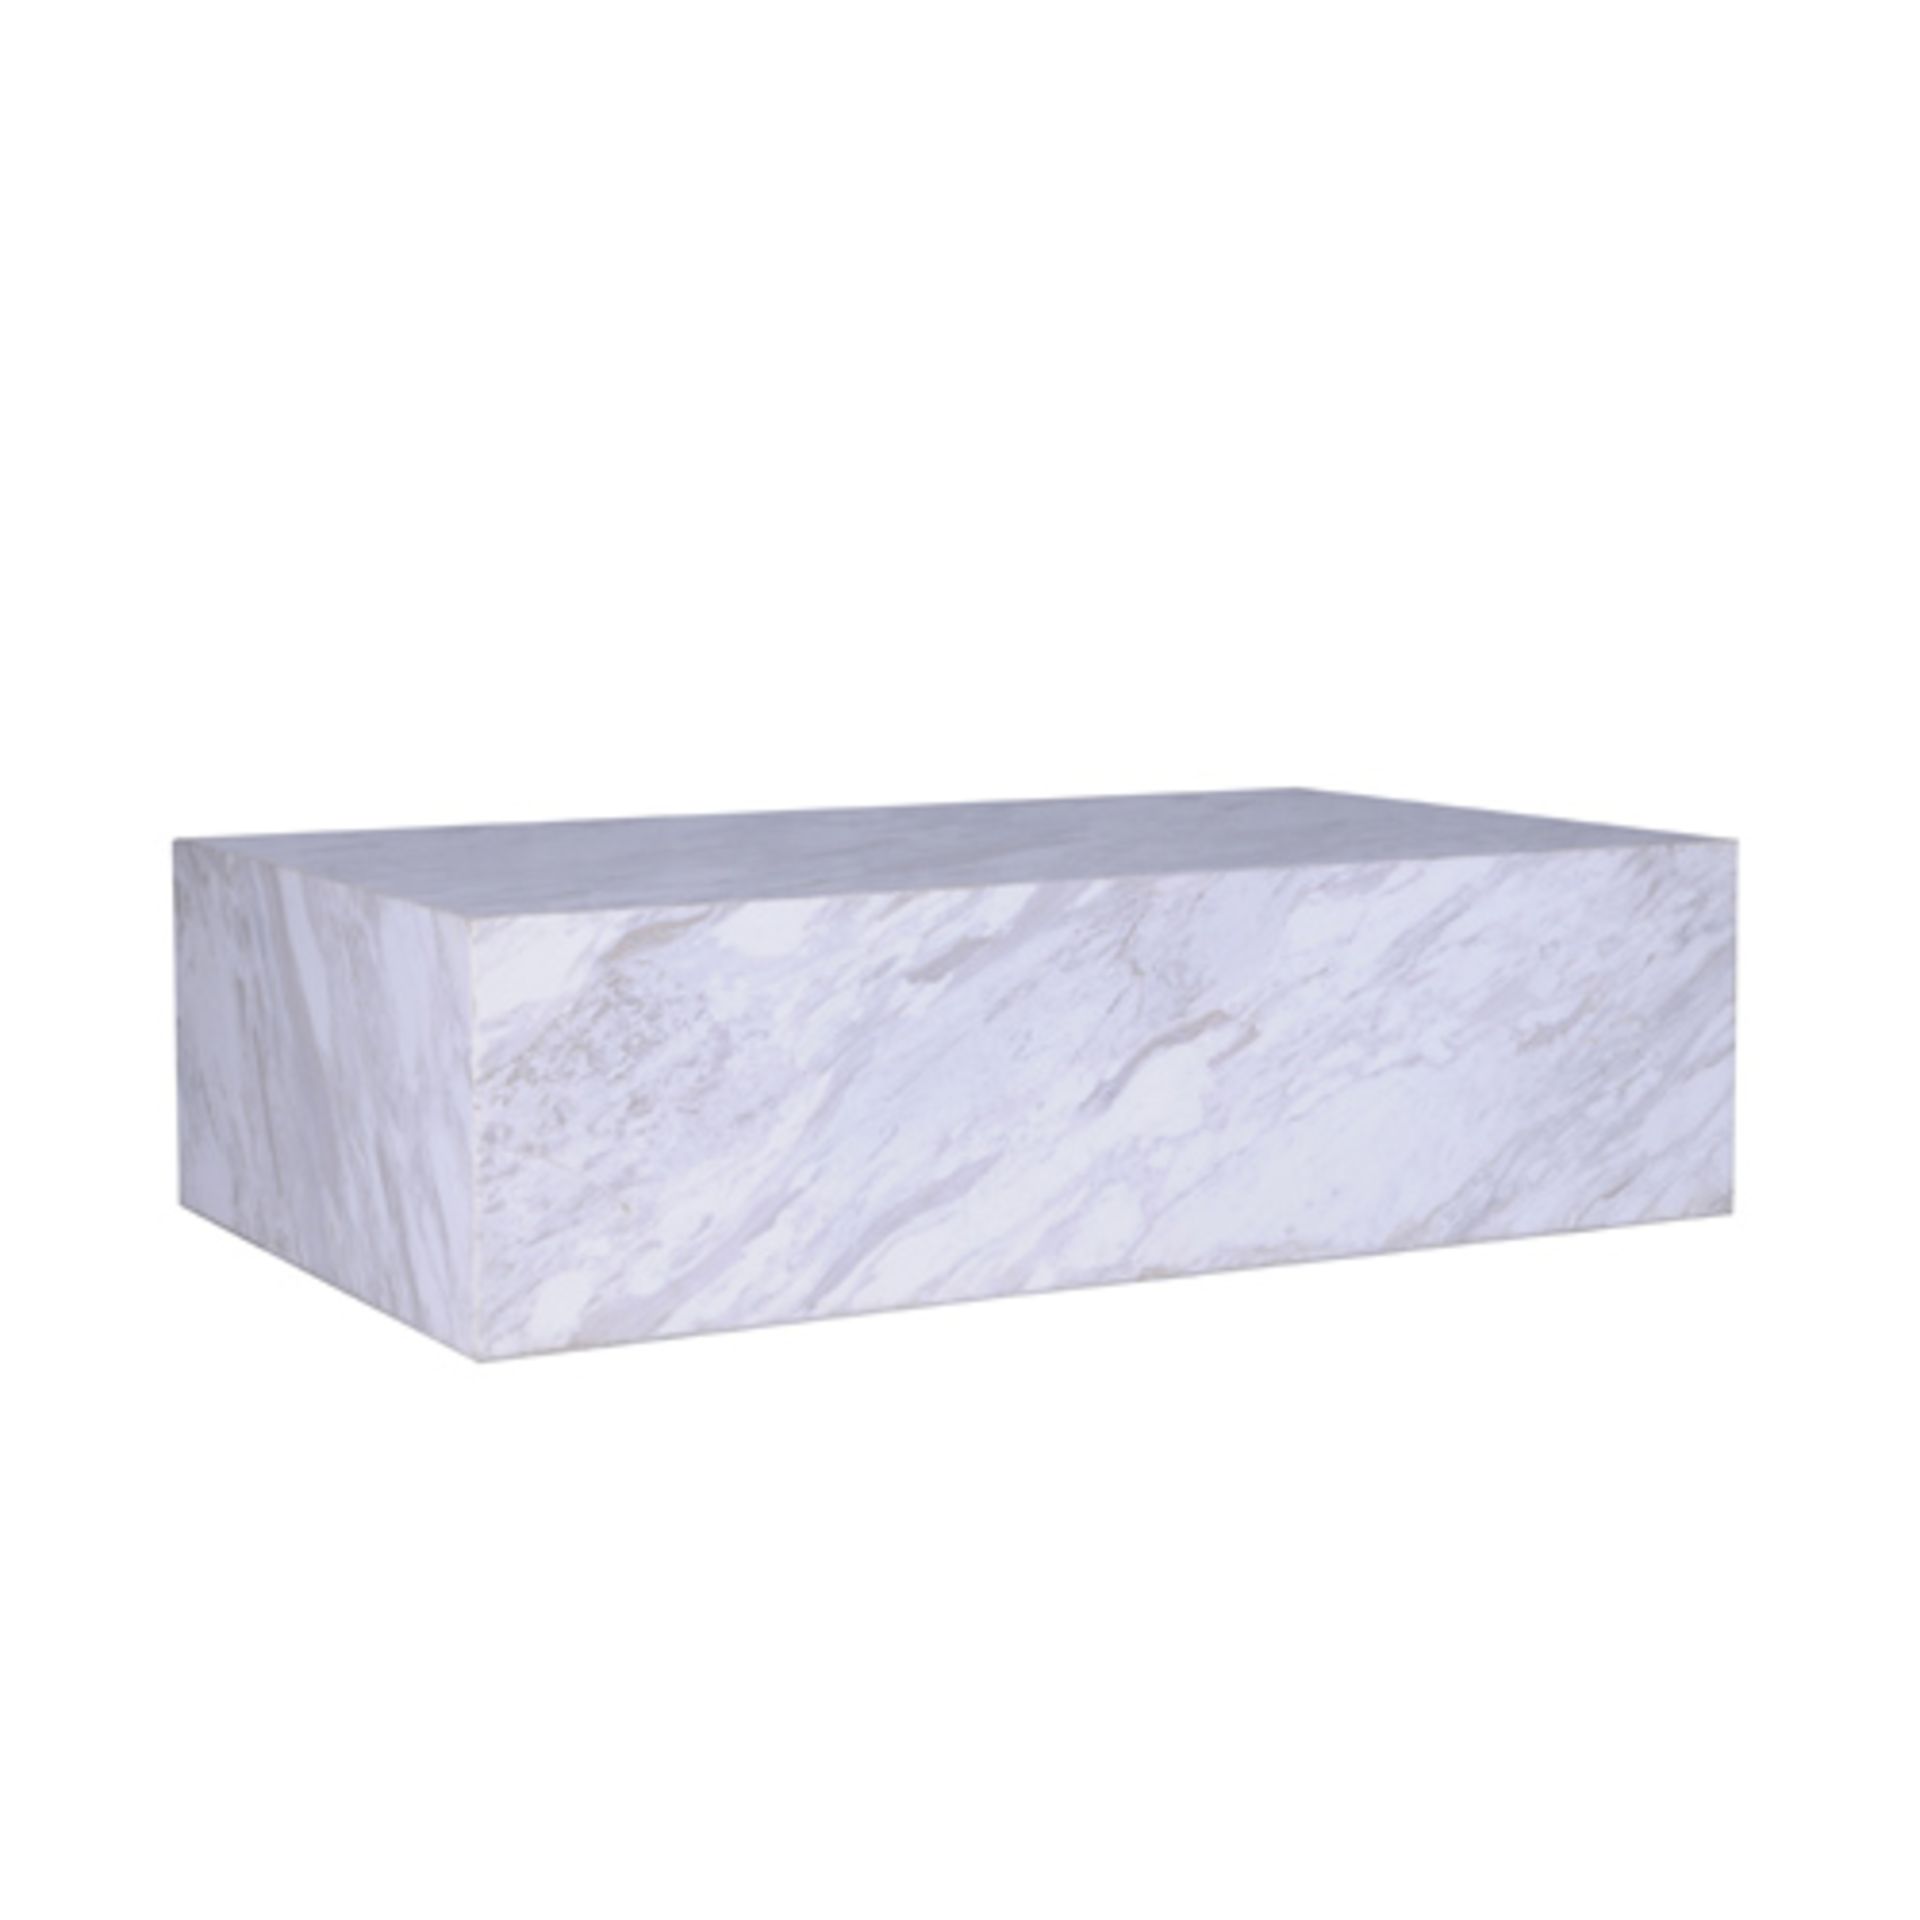 Marble Coffee Table 150x90cm W/Caster Marble White Polished